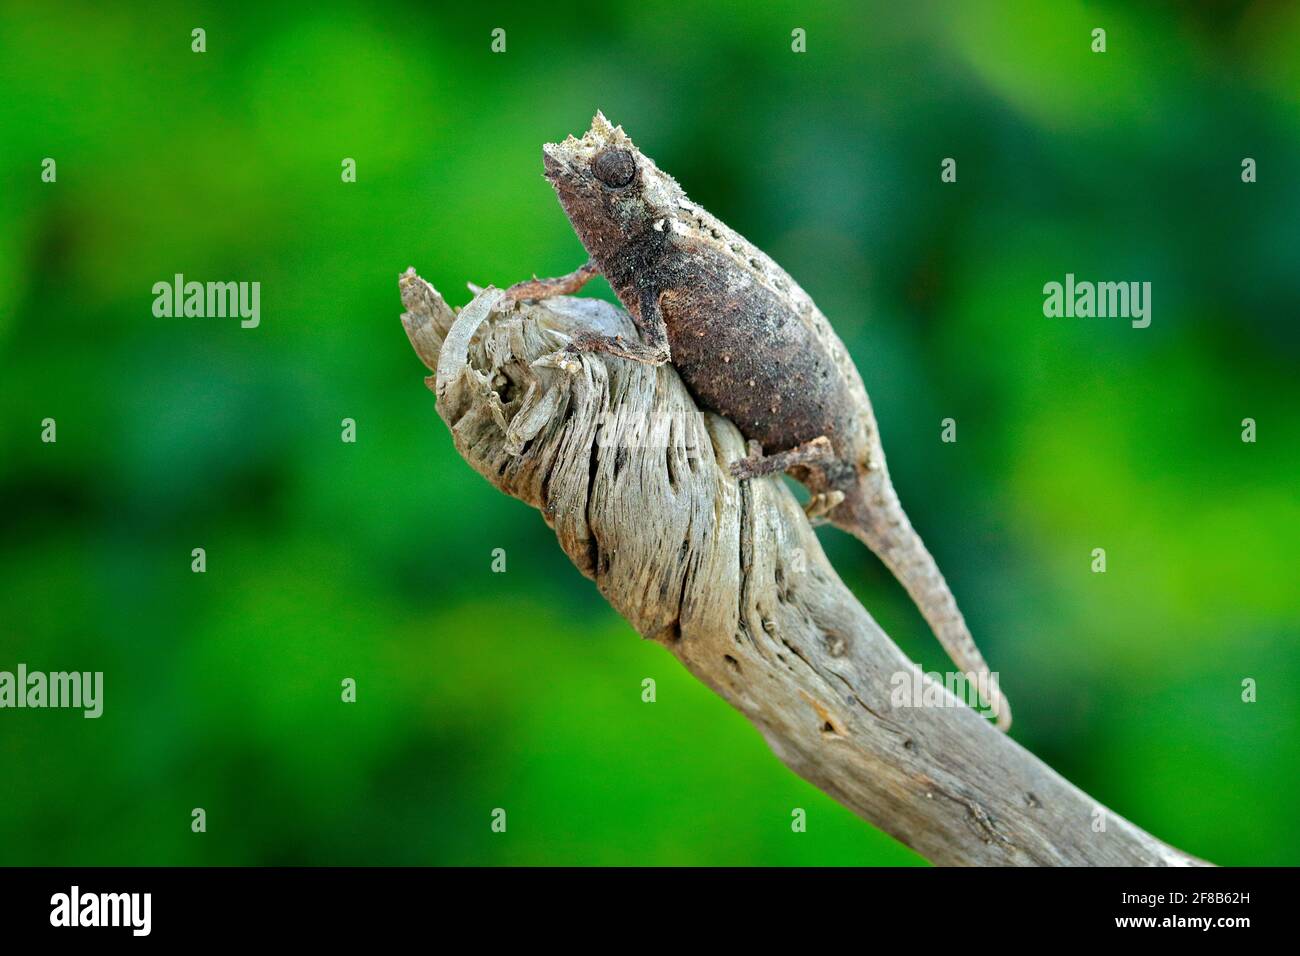 Brookesia thieli, Thiel's Pygmy-Chameleon sitting on the branch in forest habitat. Exotic beautiful endemic green reptile with long tail from Madagasc Stock Photo